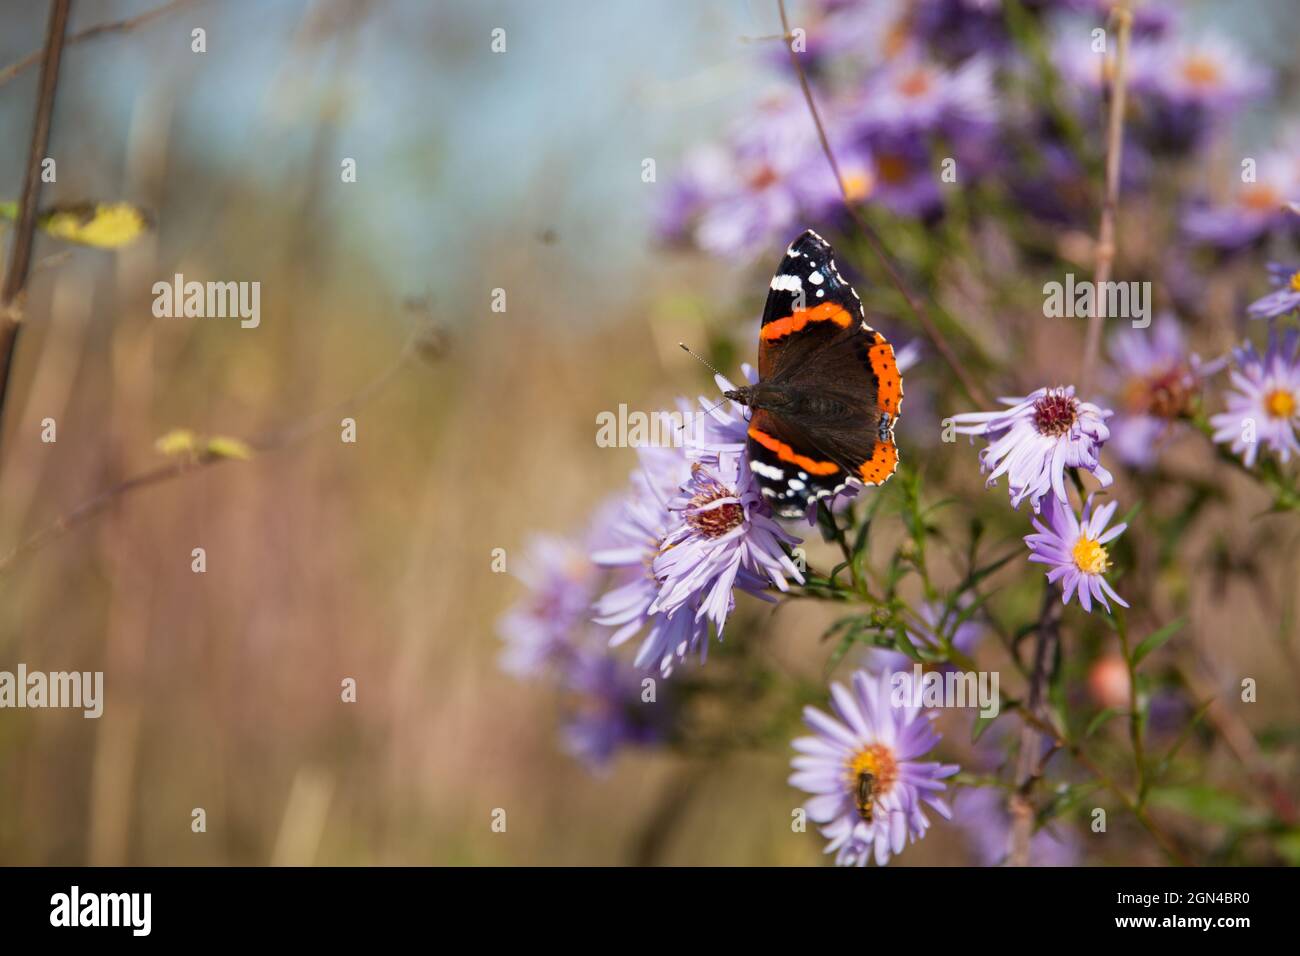 Butterfly on a flower. Butterfly with colored wings close-up. Stock Photo